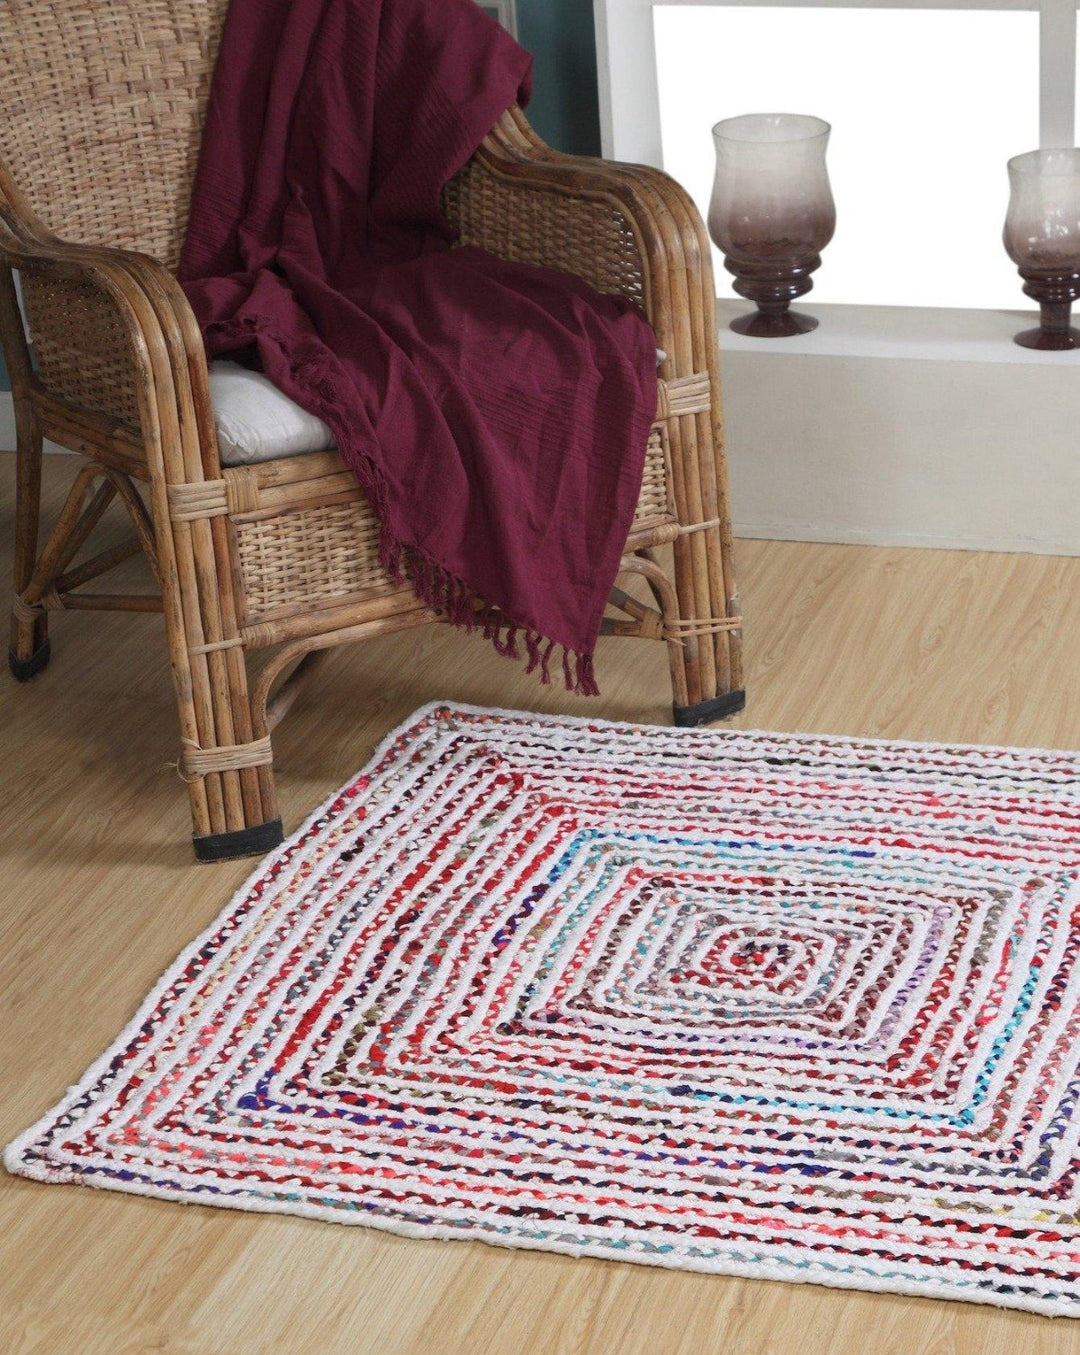 CARNIVAL Square Bedroom Rug Ethical Source with Recycled Fabric - Second Nature Online